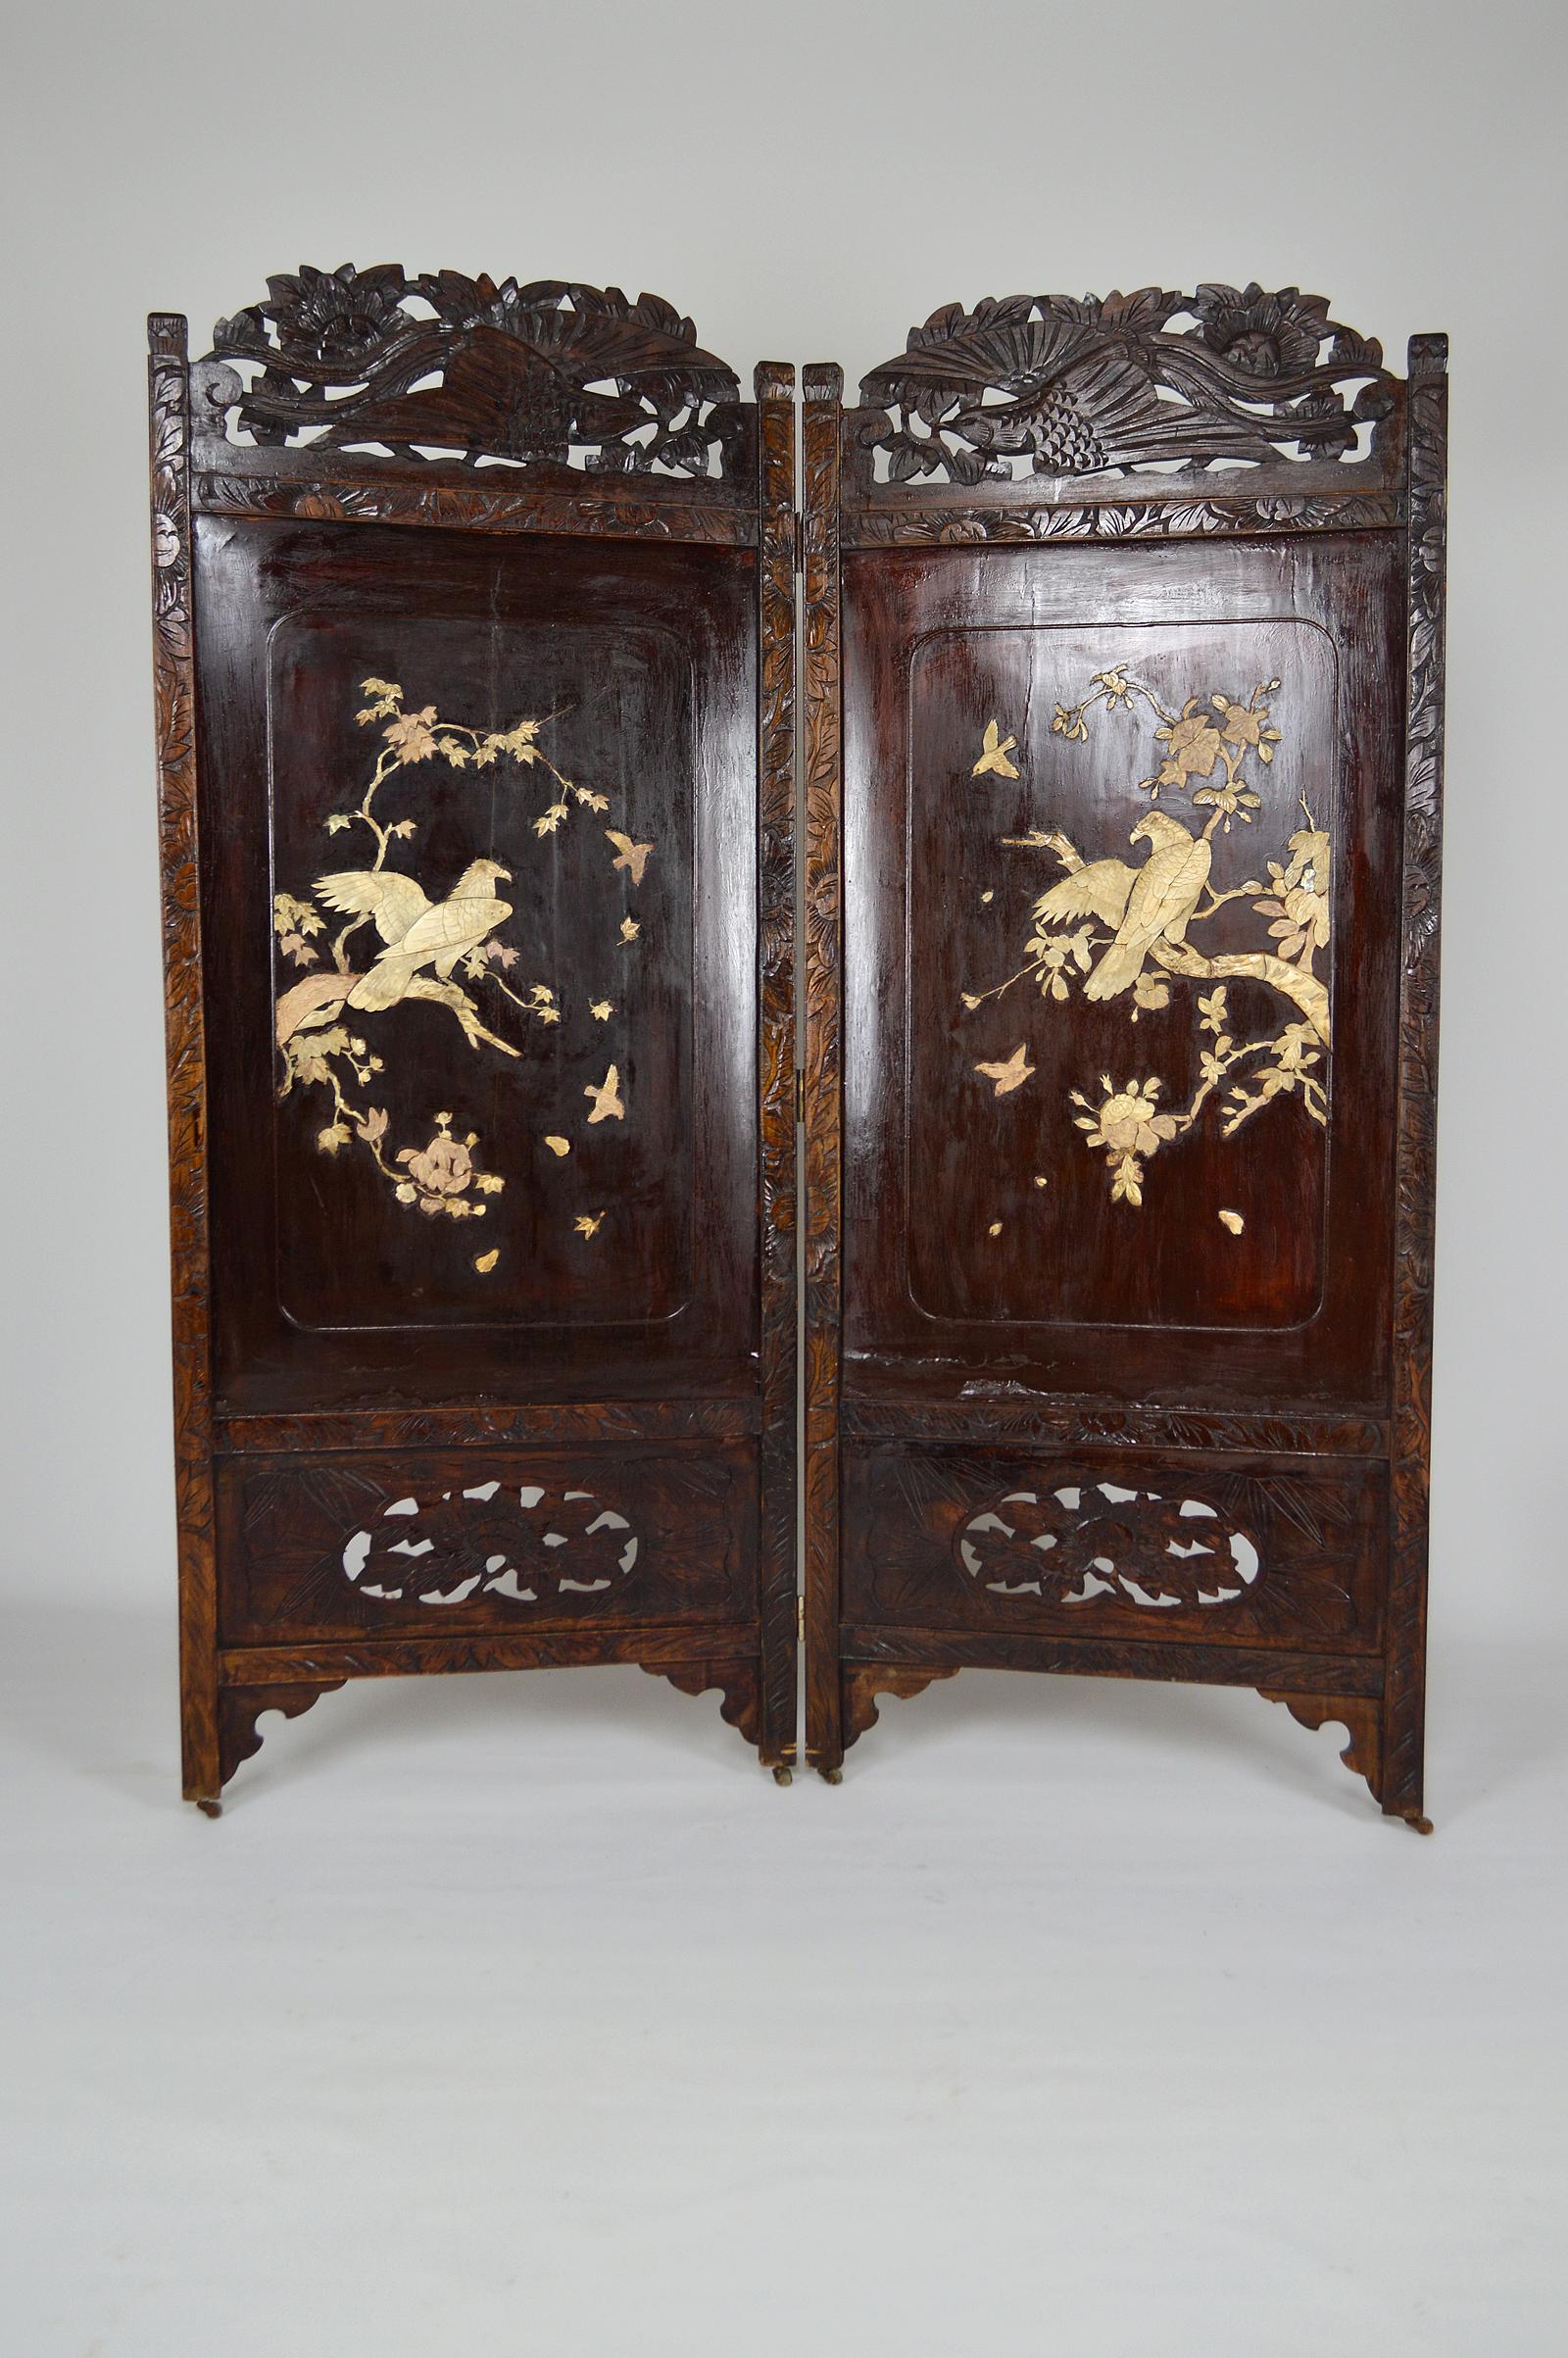 Folding screen / room divider.
In carved, inlaid and lacquered wood.

Carved with birds and foliage.
The central panels are inlaid on one side, on the theme of birds of prey / raptors: (Eagles, Hawks, Falcons, Buzzards). The Hawk posed on a